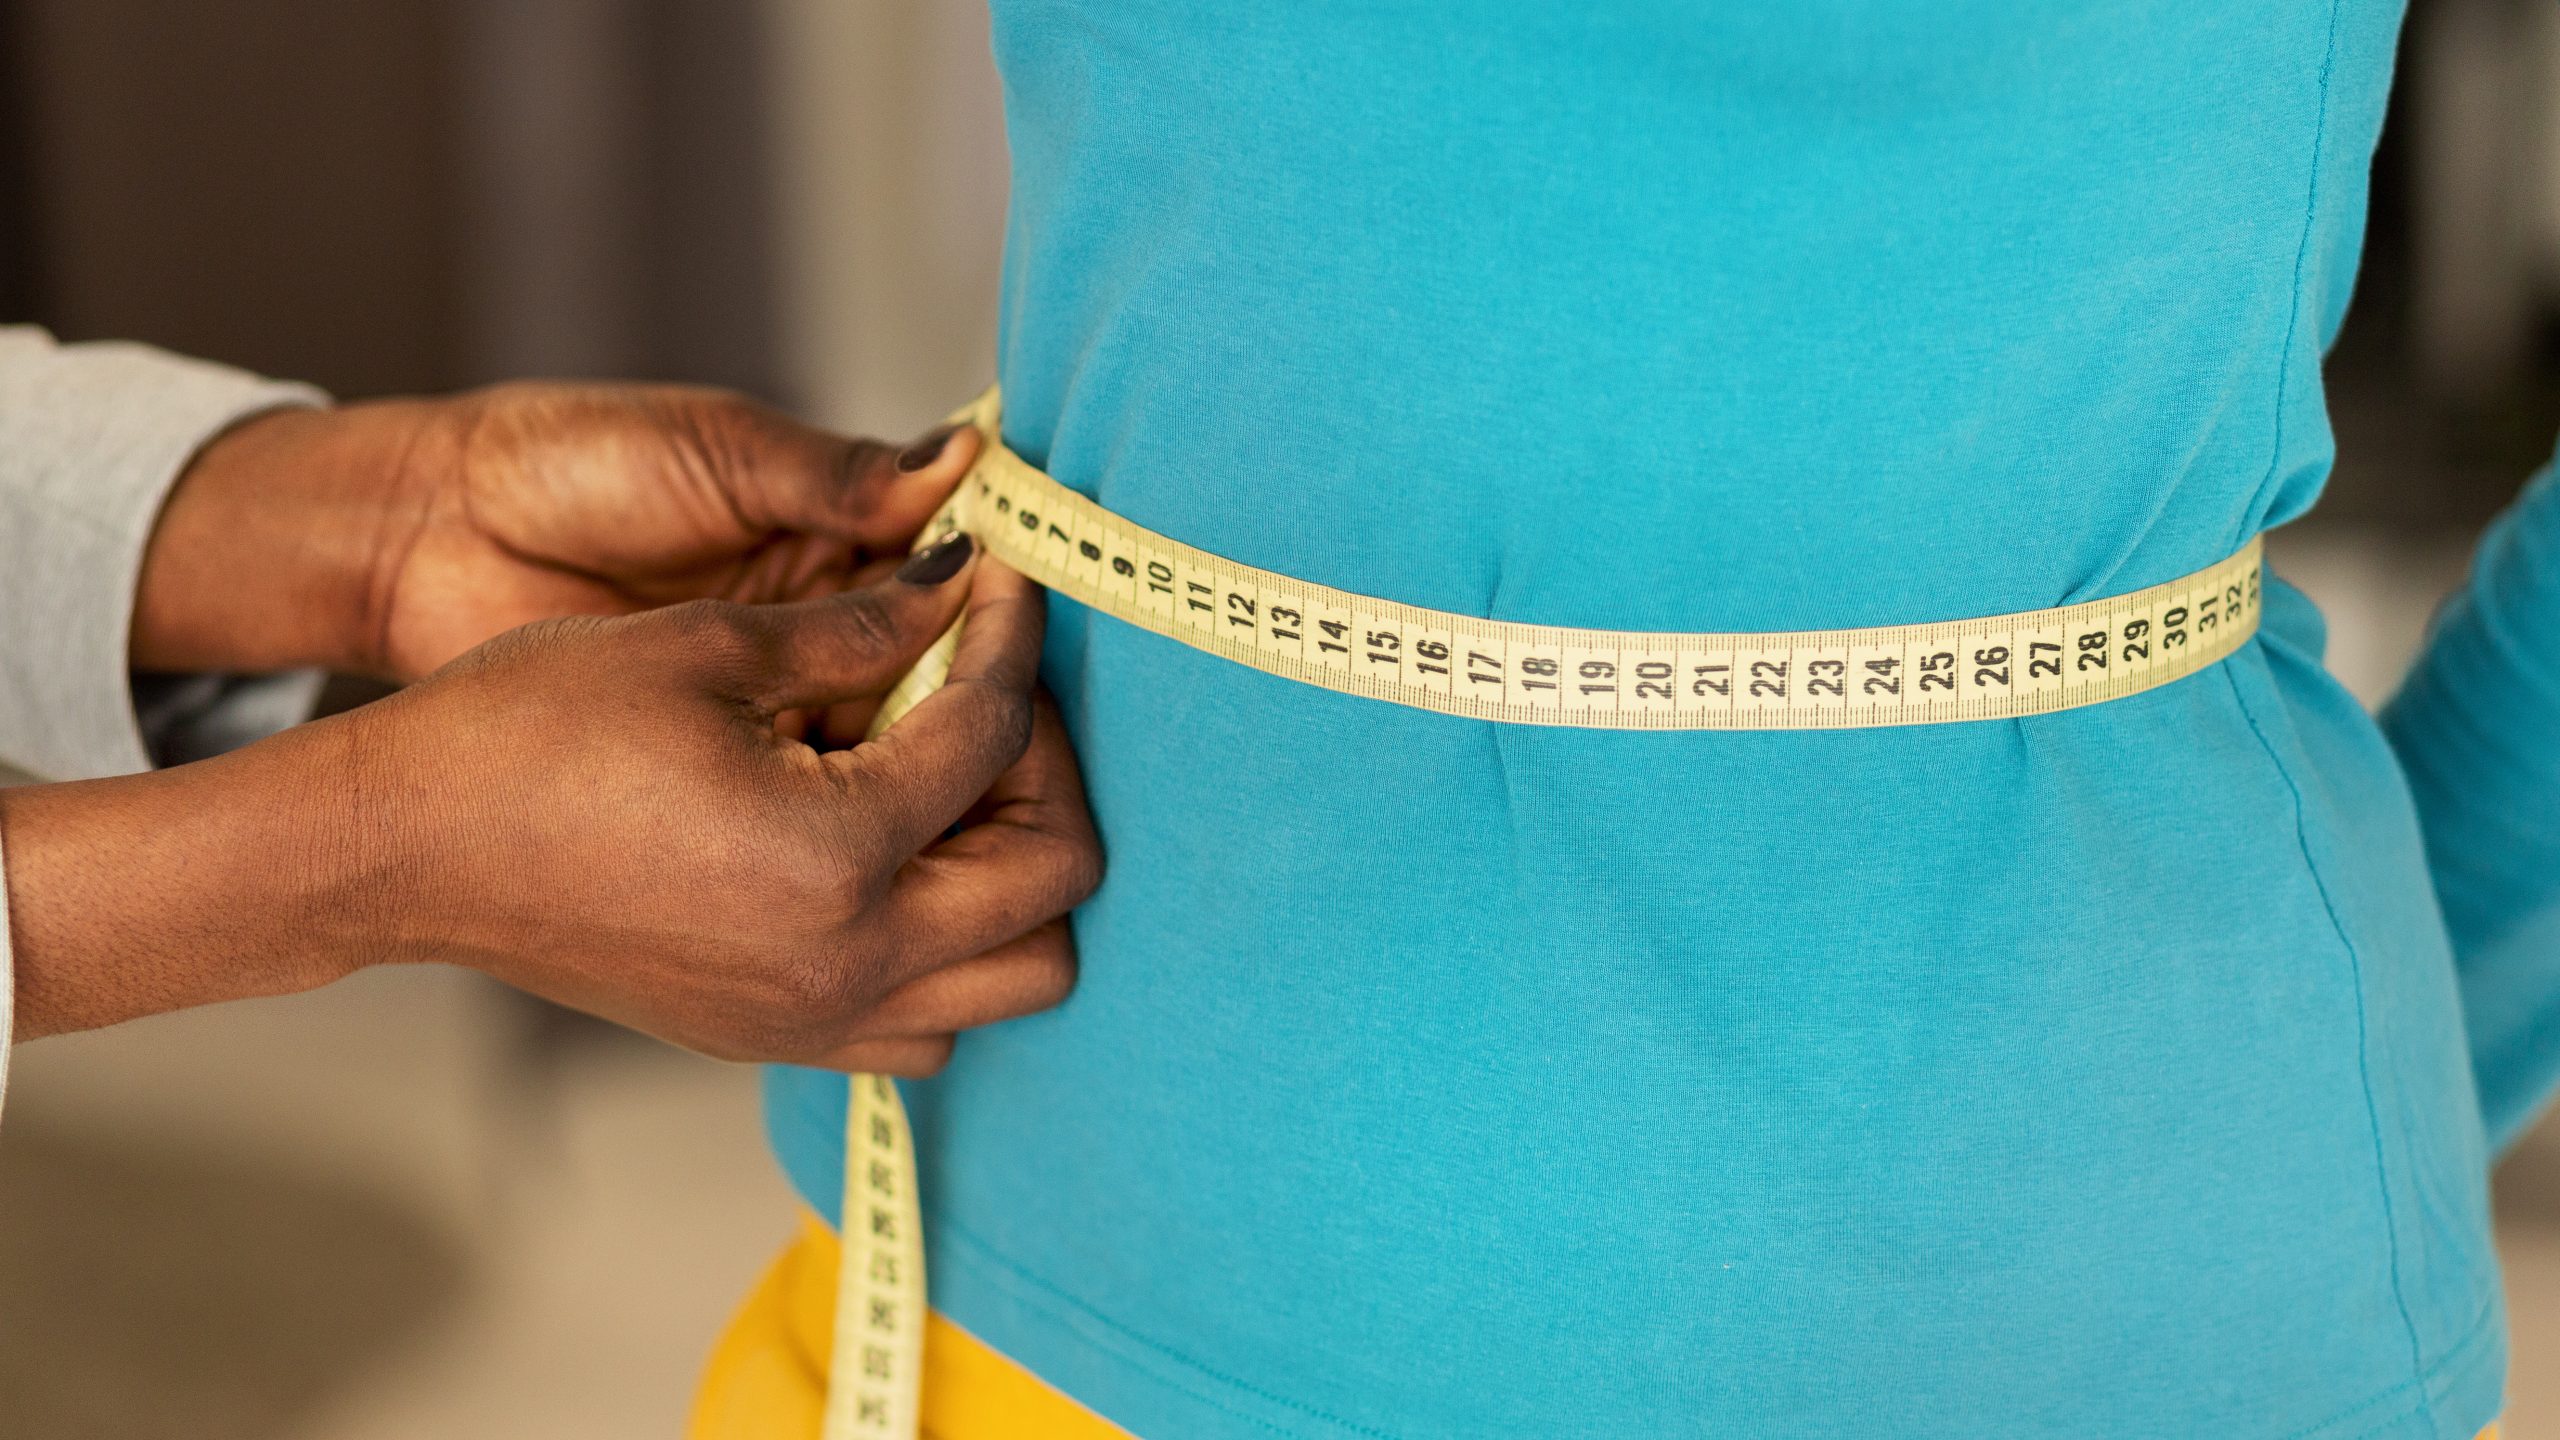 Waist circumference being measured with a tape measure